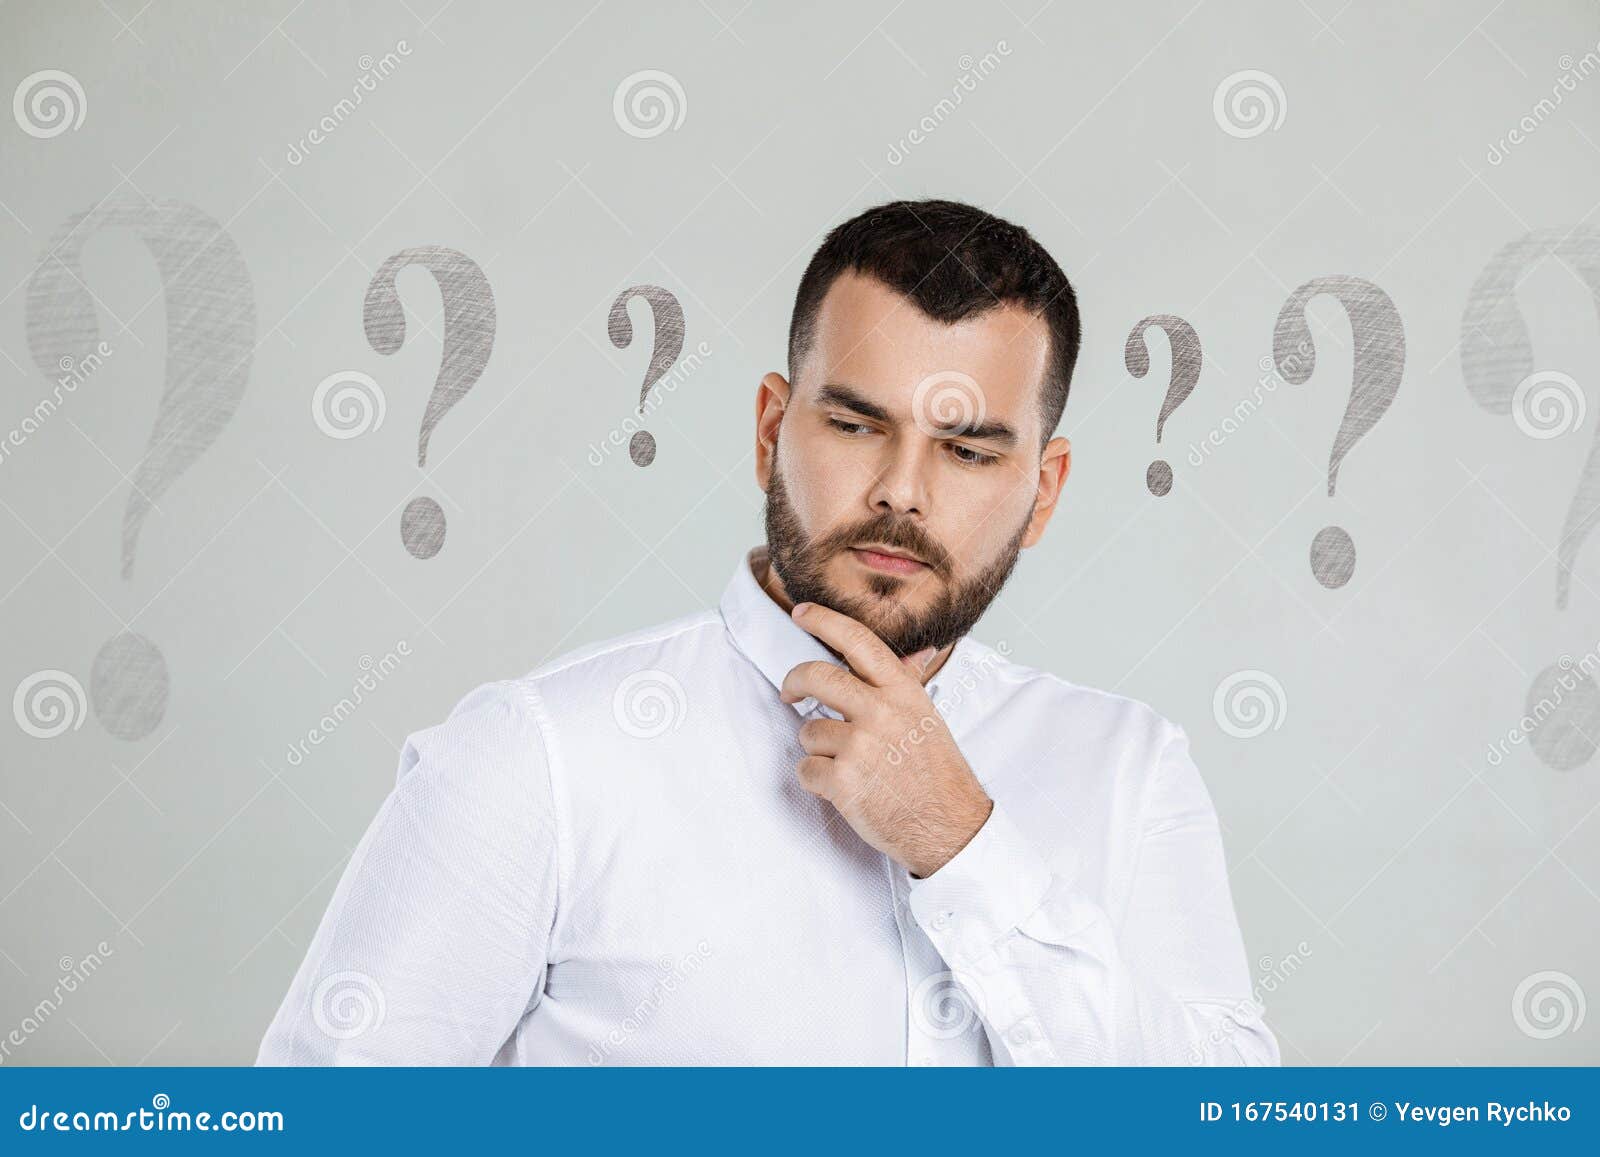 Man Asking Questions Stock Image Image Of Manager Memory 167540131